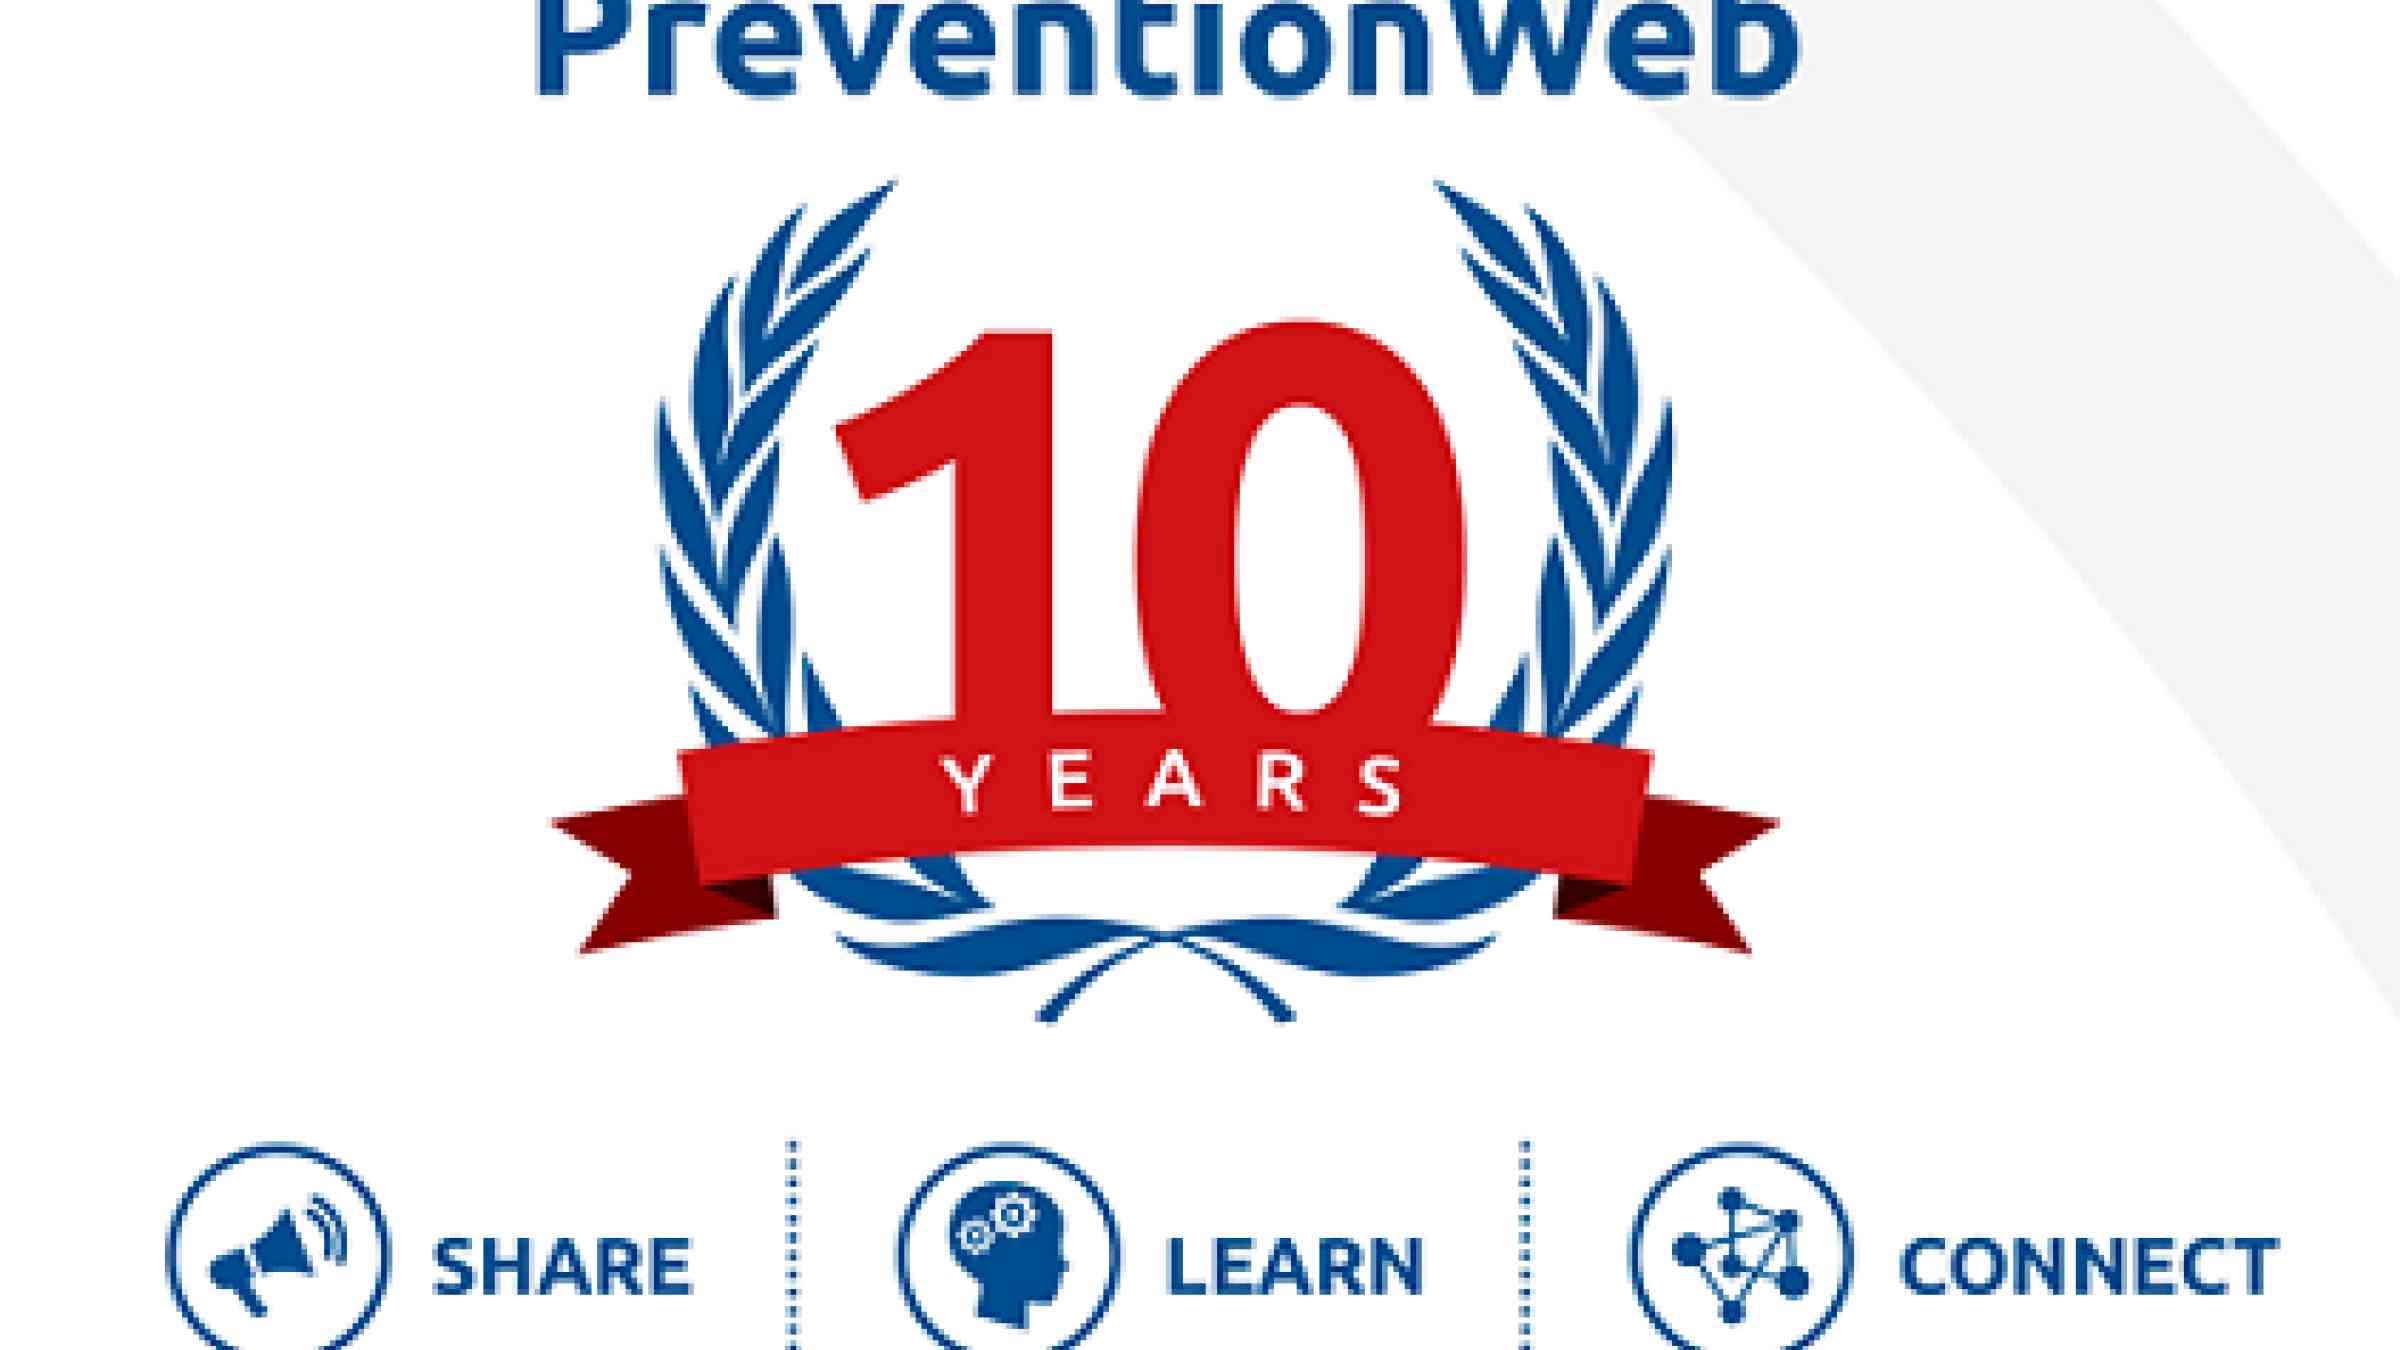 PreventionWeb marks 10th anniversary with launch of new features